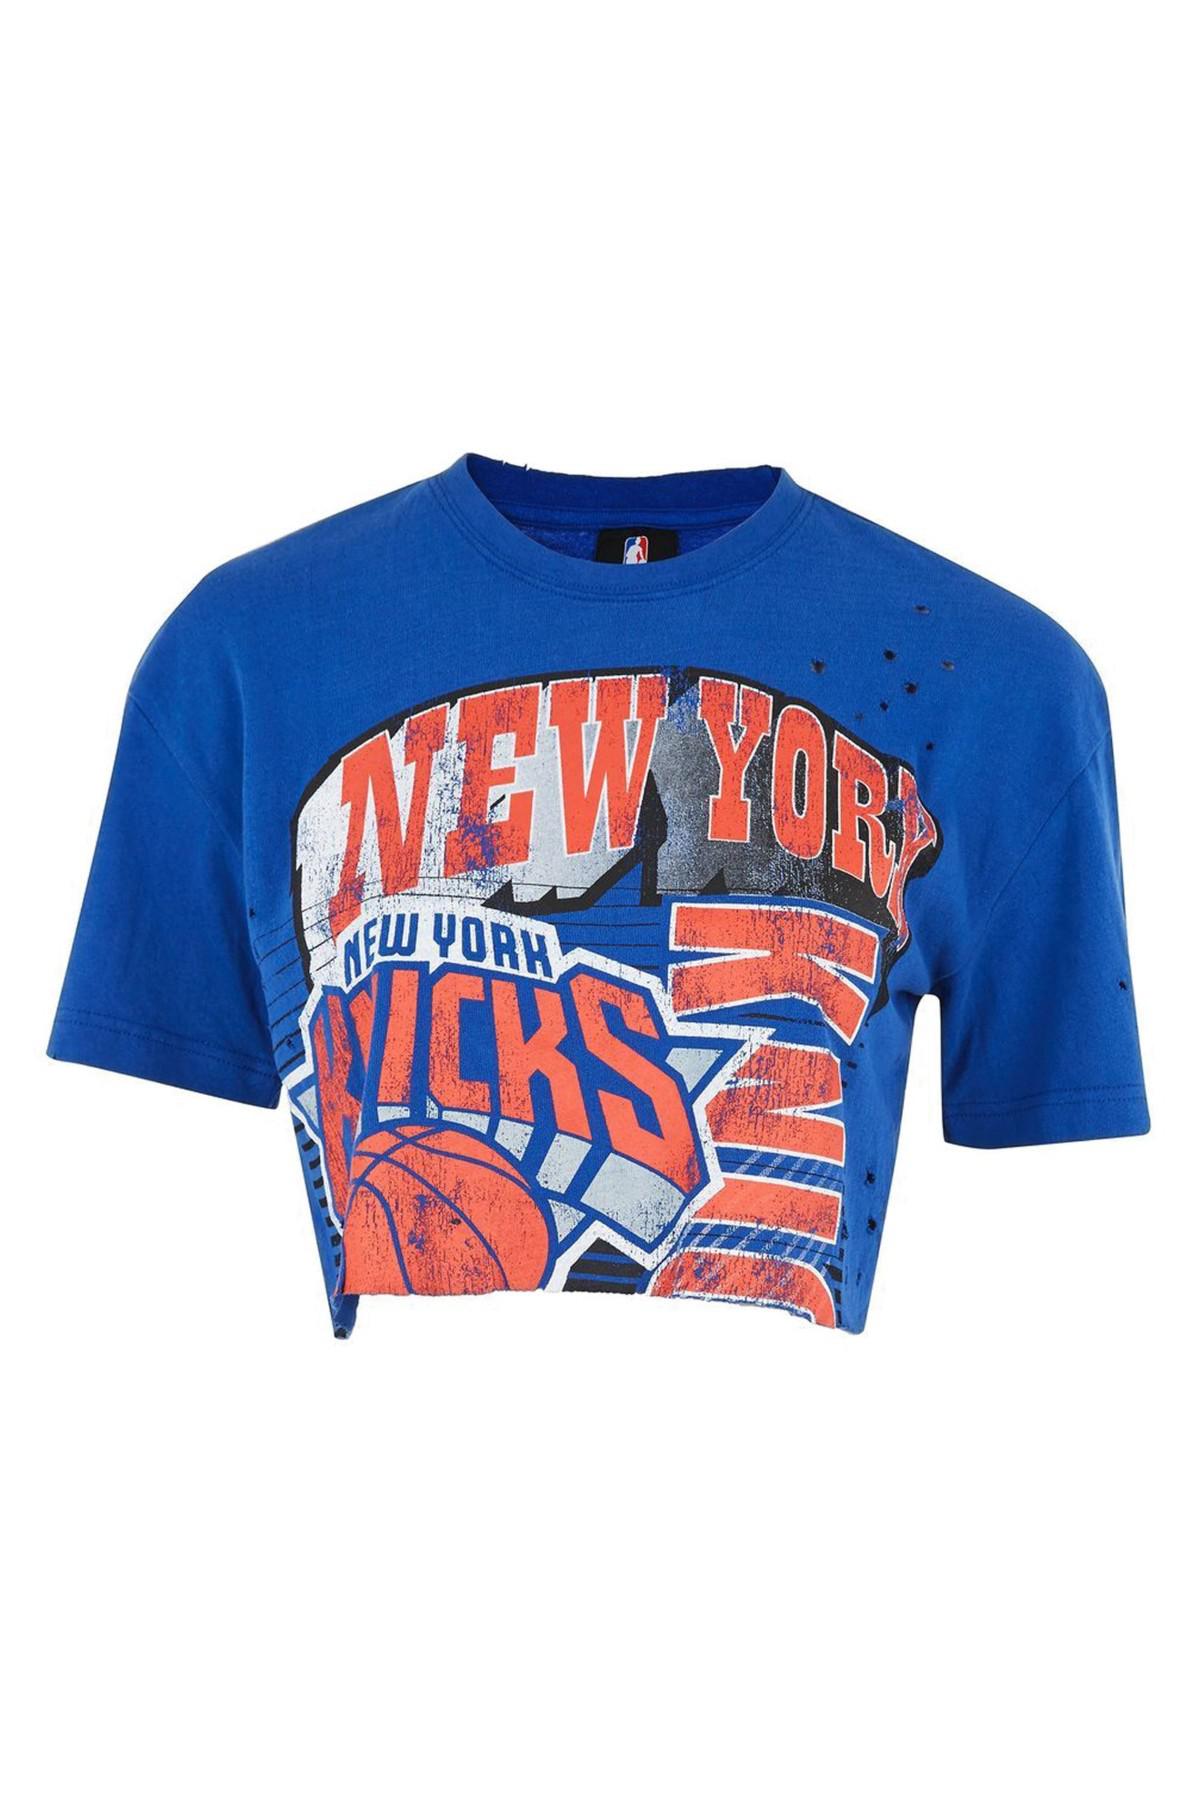 TOPSHOP New York Knicks Crop Top By Unk X in Blue | Lyst